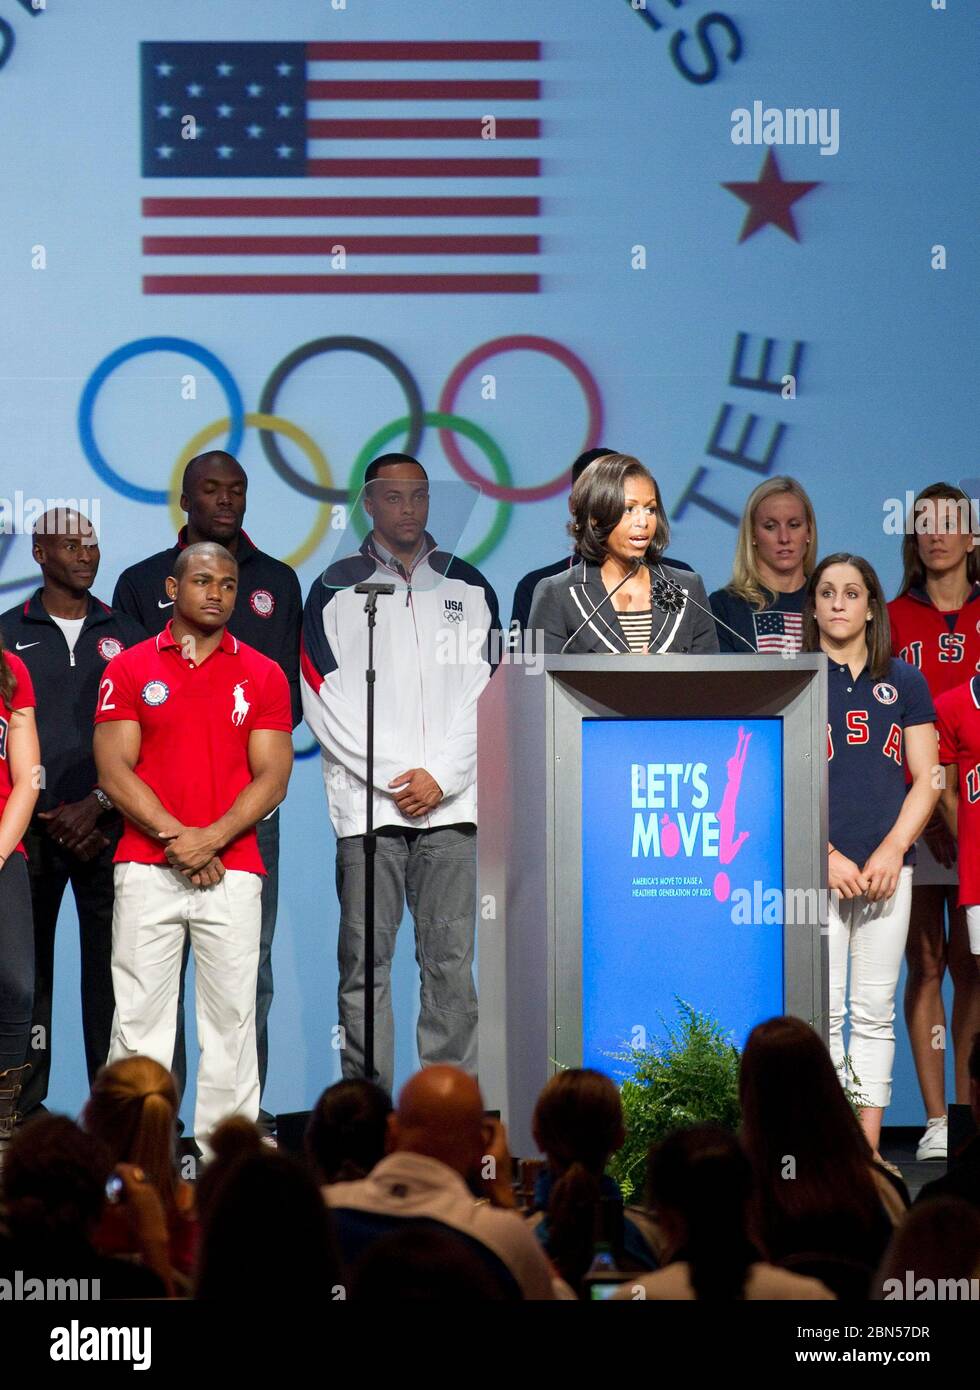 Dallas Texas USA, May 2012: First Lady of the United States Michelle Obama speaks at the United States Olympic Media Summit along with several athletes on stage. Marjorie Kamys Cotera/Daemmrich Photography Stock Photo